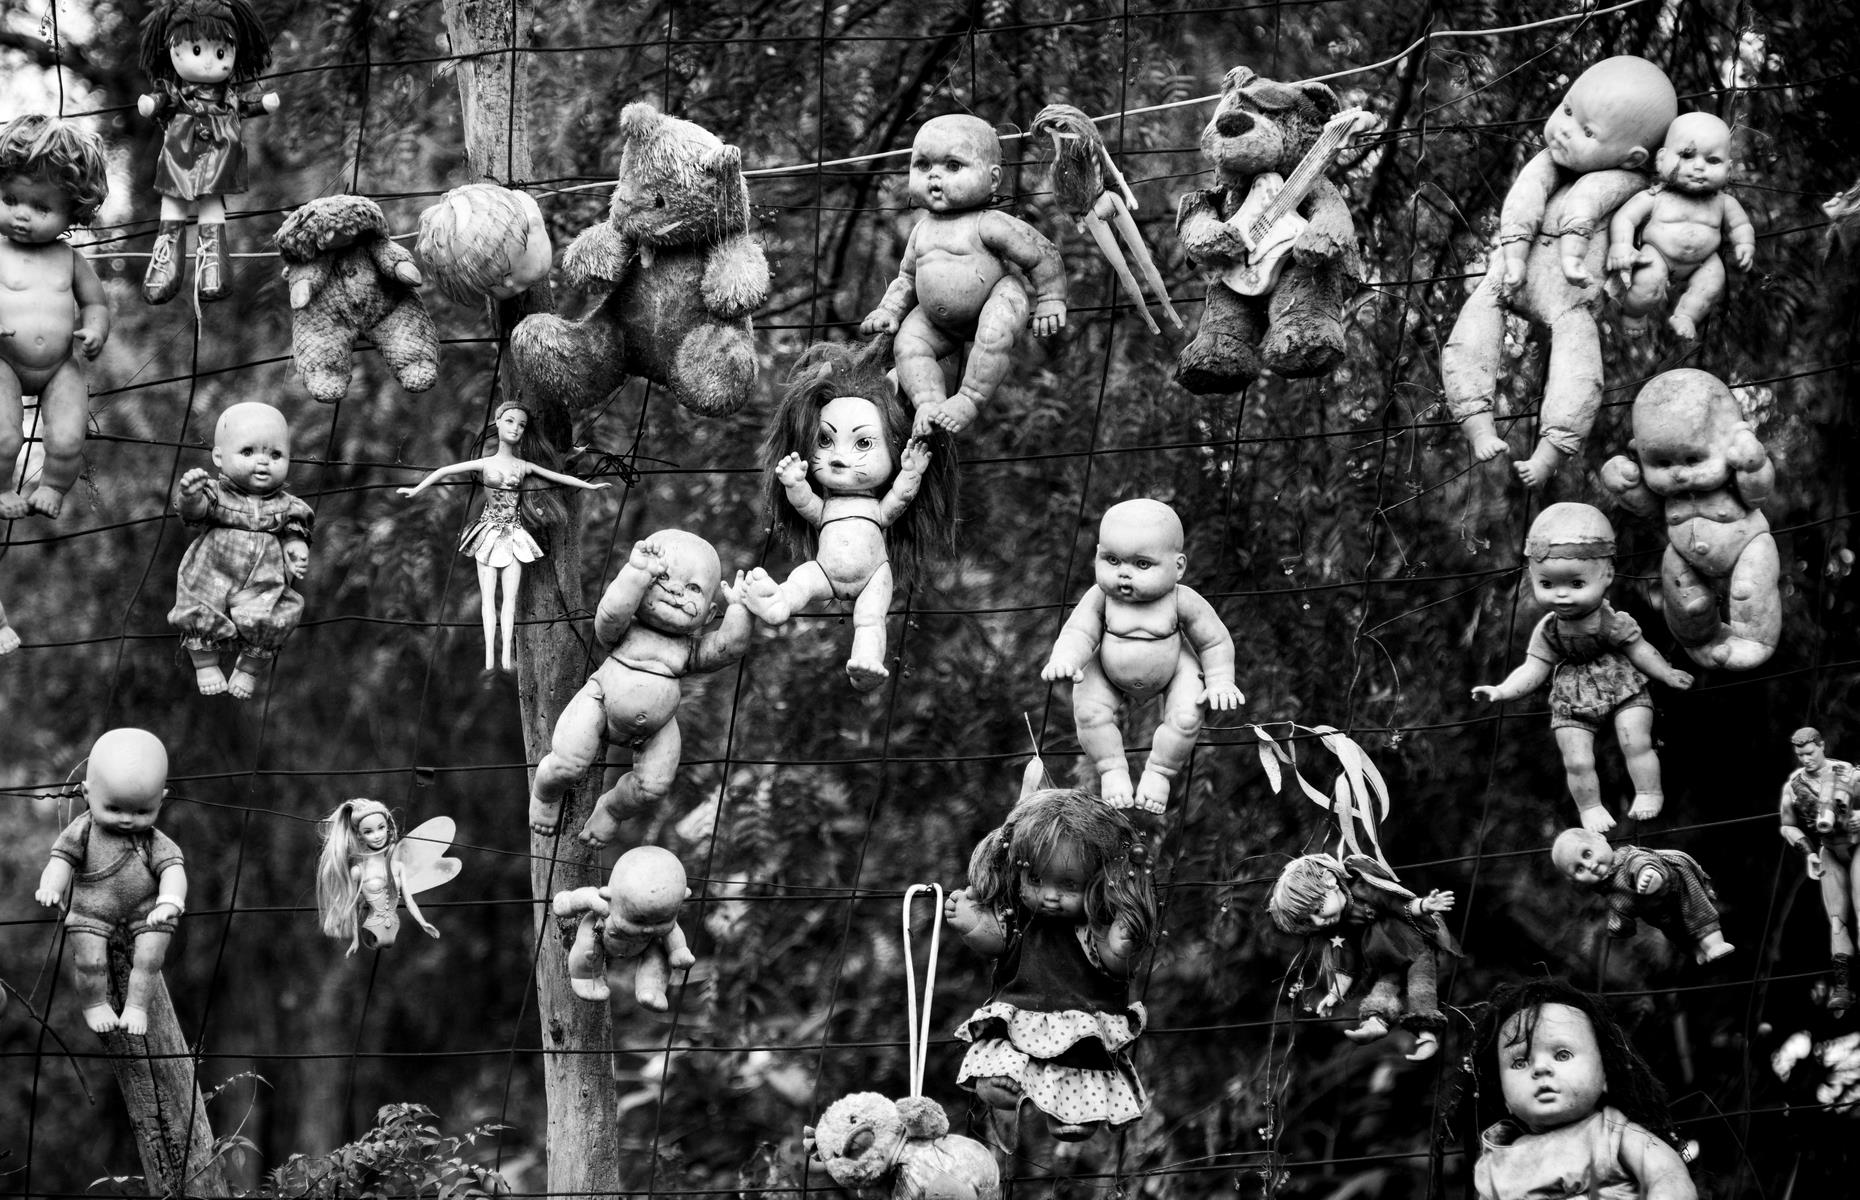 <p>Looking for something a bit more unusual? Take a two-hour canal ride from Mexico City and head to the Island of the Dolls. This accidental tourist attraction was created by reclusive local man Julian Santana Barrera, who died in 2001. He collected and hung the dolls to appease the spirit of a young girl he believed to be haunting the woods. The area was declared a UNESCO World Heritage Site in 1987.</p>  <p><a href="https://www.loveexploring.com/galleries/68140/haunted-hotels?page=1"><strong>Would you be brave enough to check into these haunted hotels?</strong></a></p>